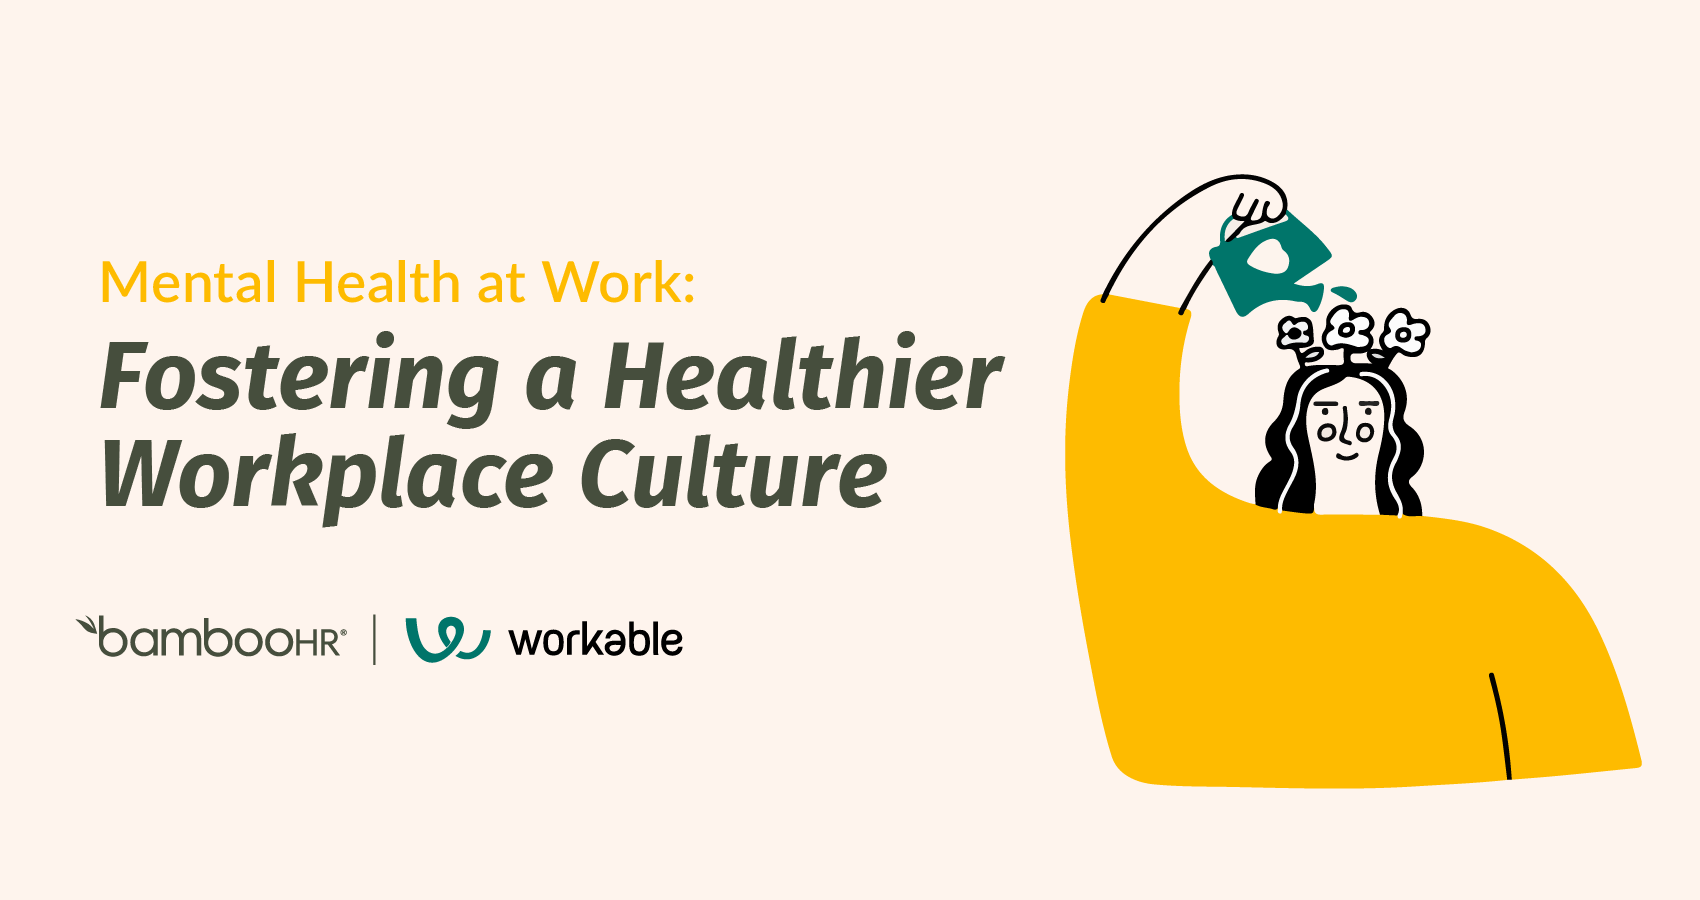 Mental Health at Work: Fostering a healthier workplace culture